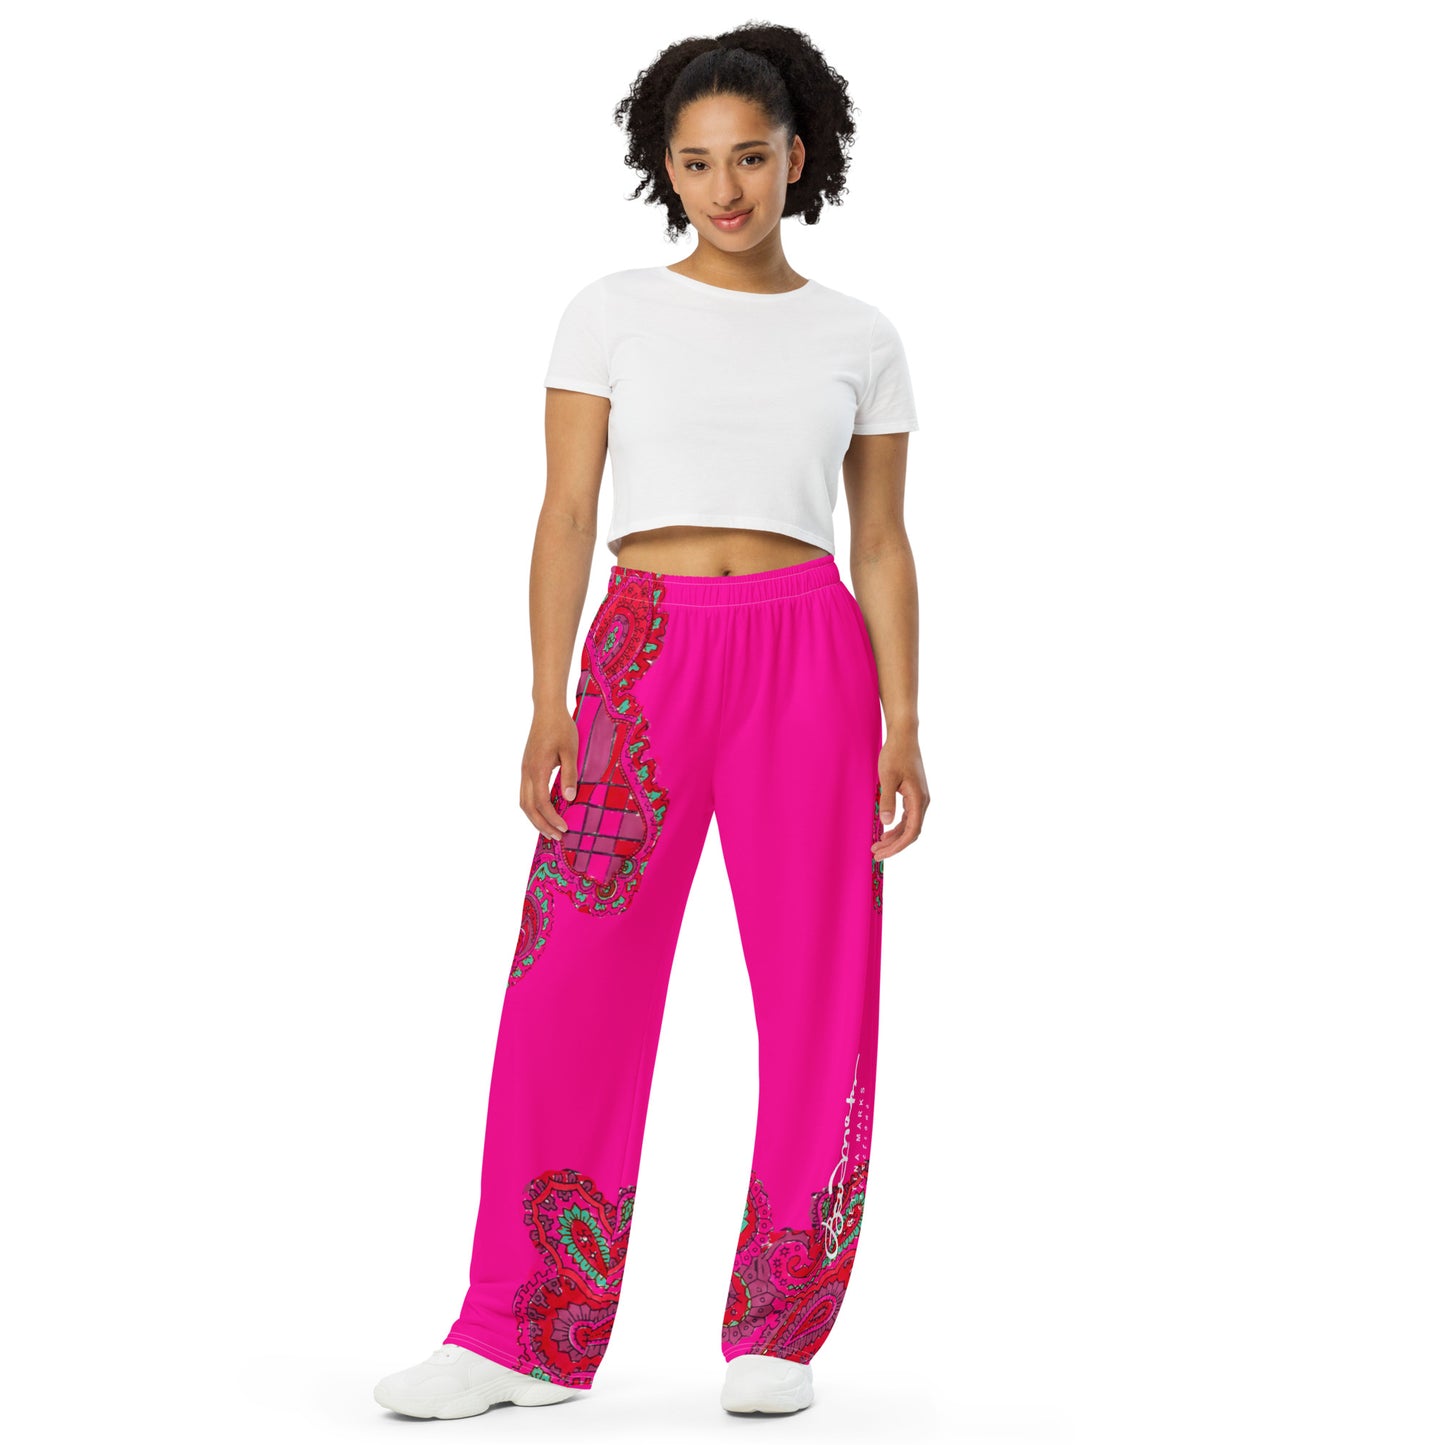 Wide Leg Pants Bright Fuscia and Red Poppy Paisley on Plaid - Women